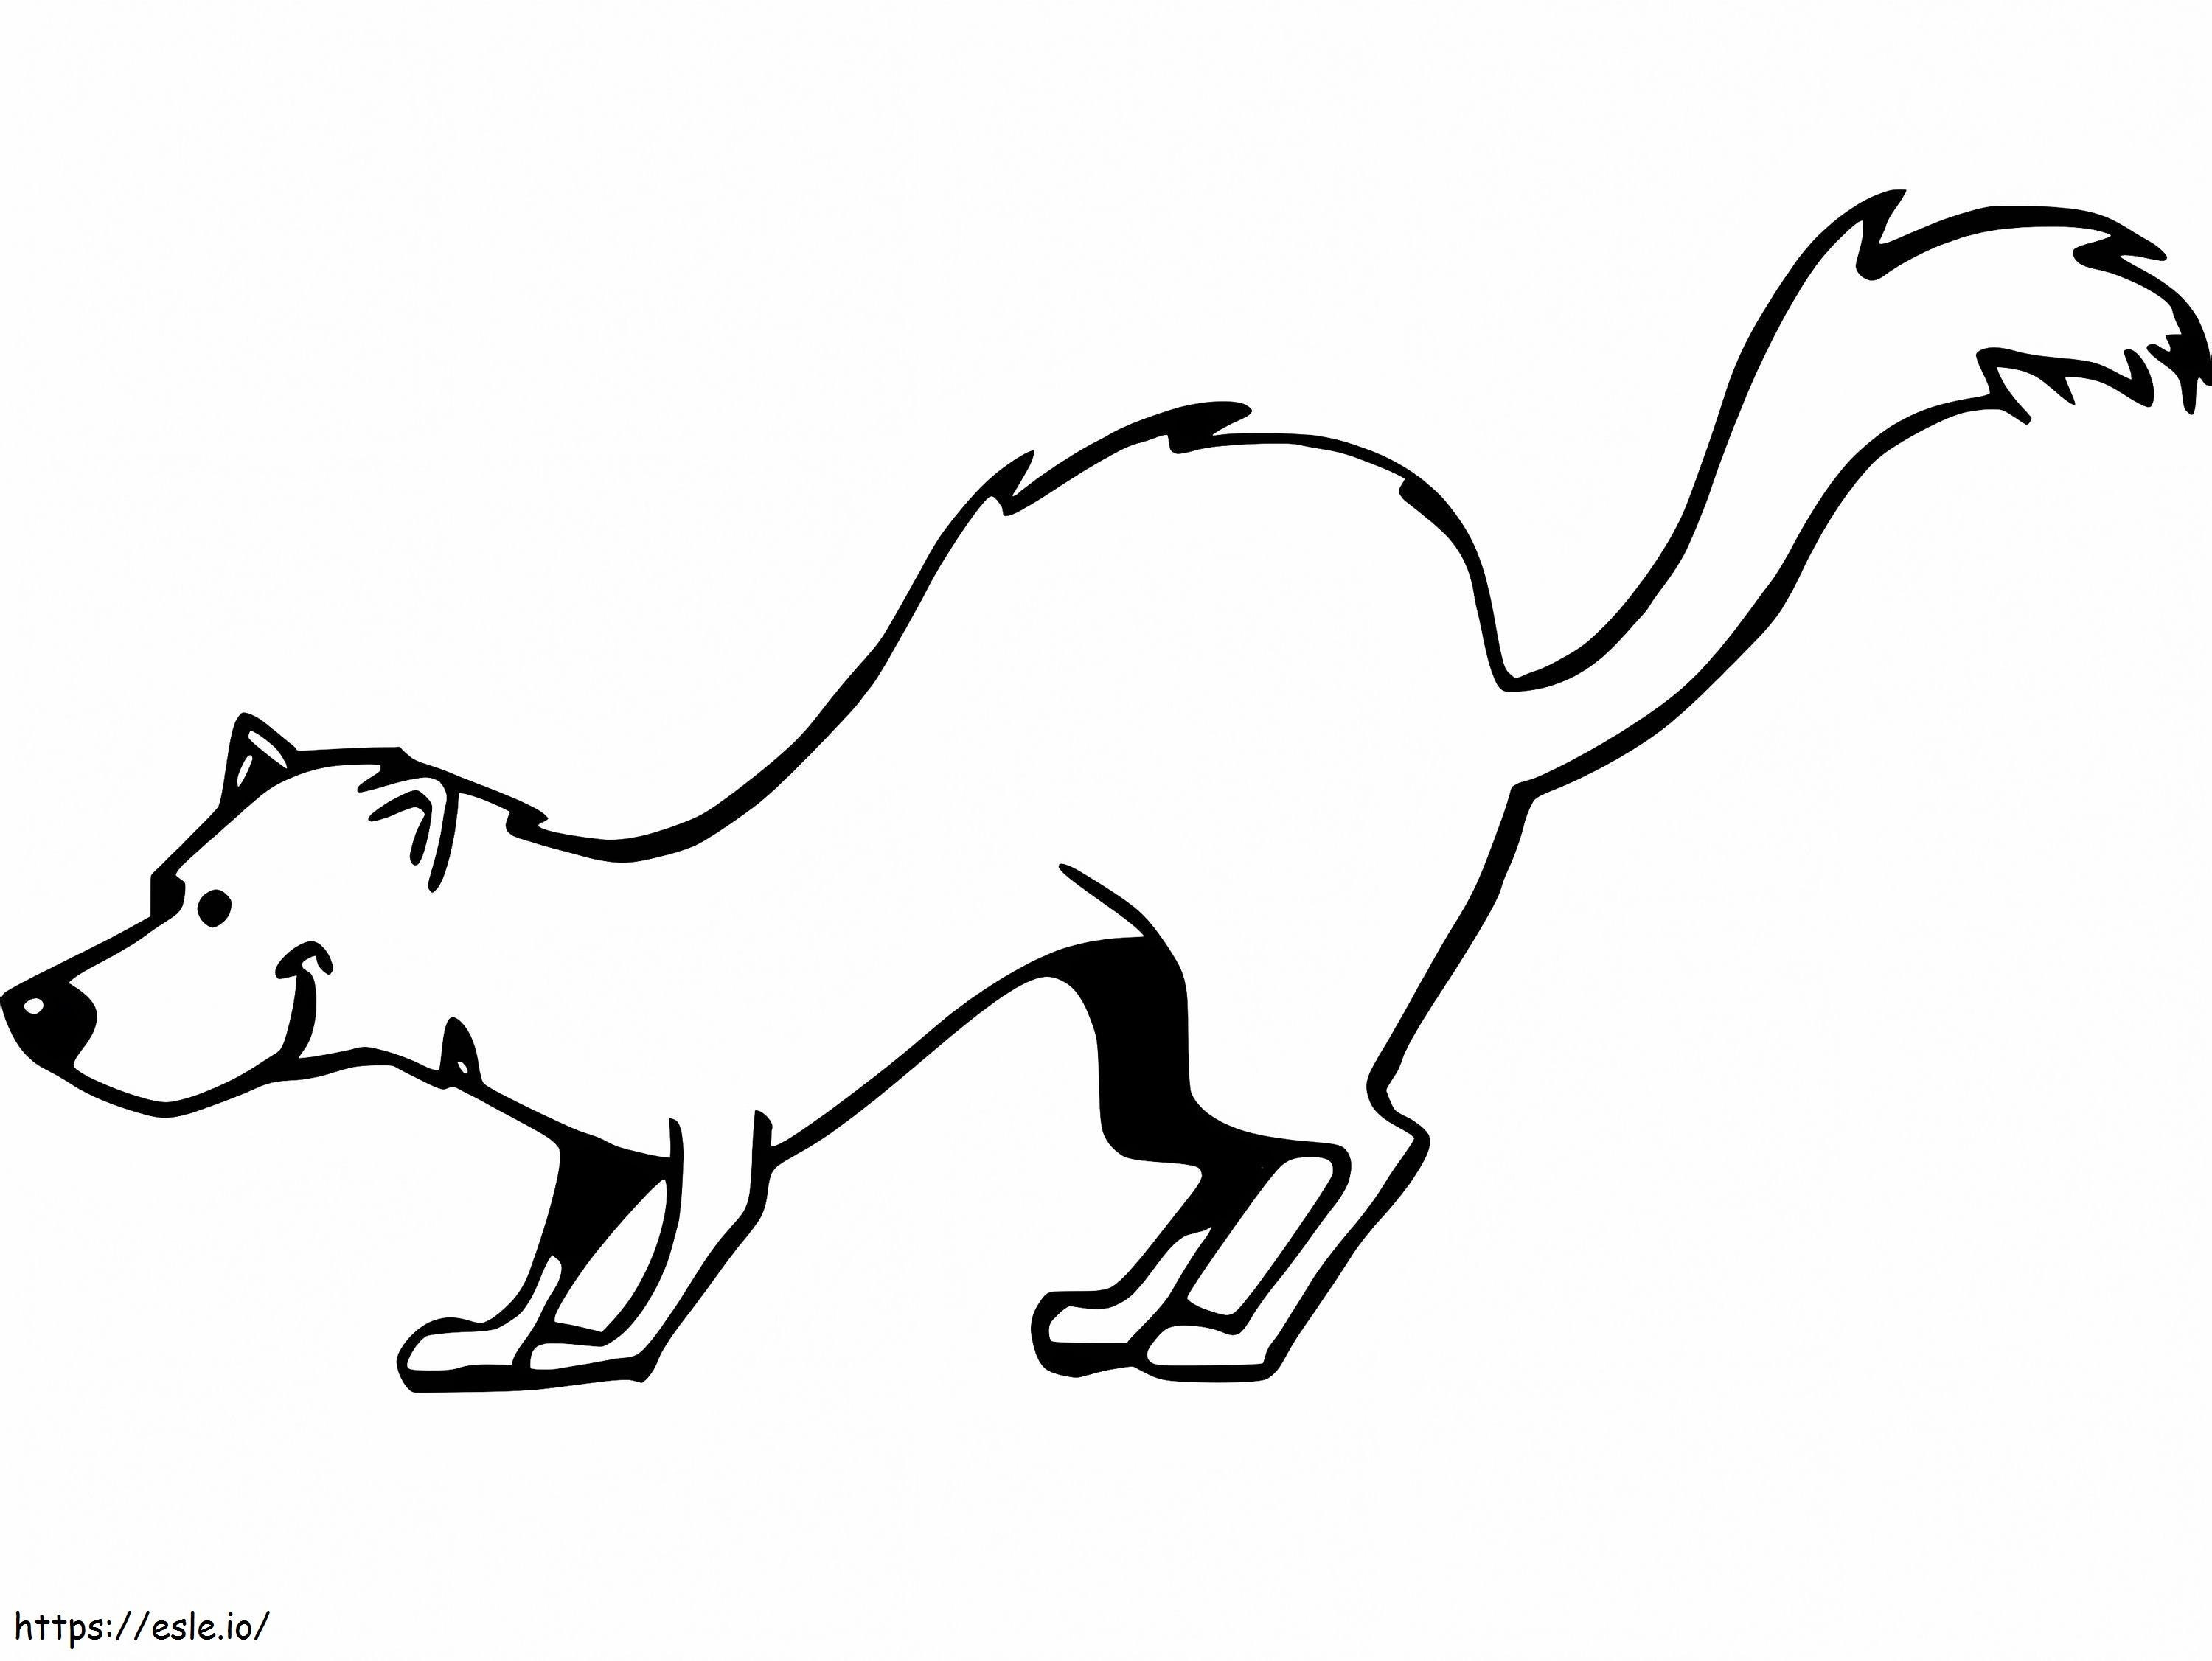 Weasel 15 coloring page